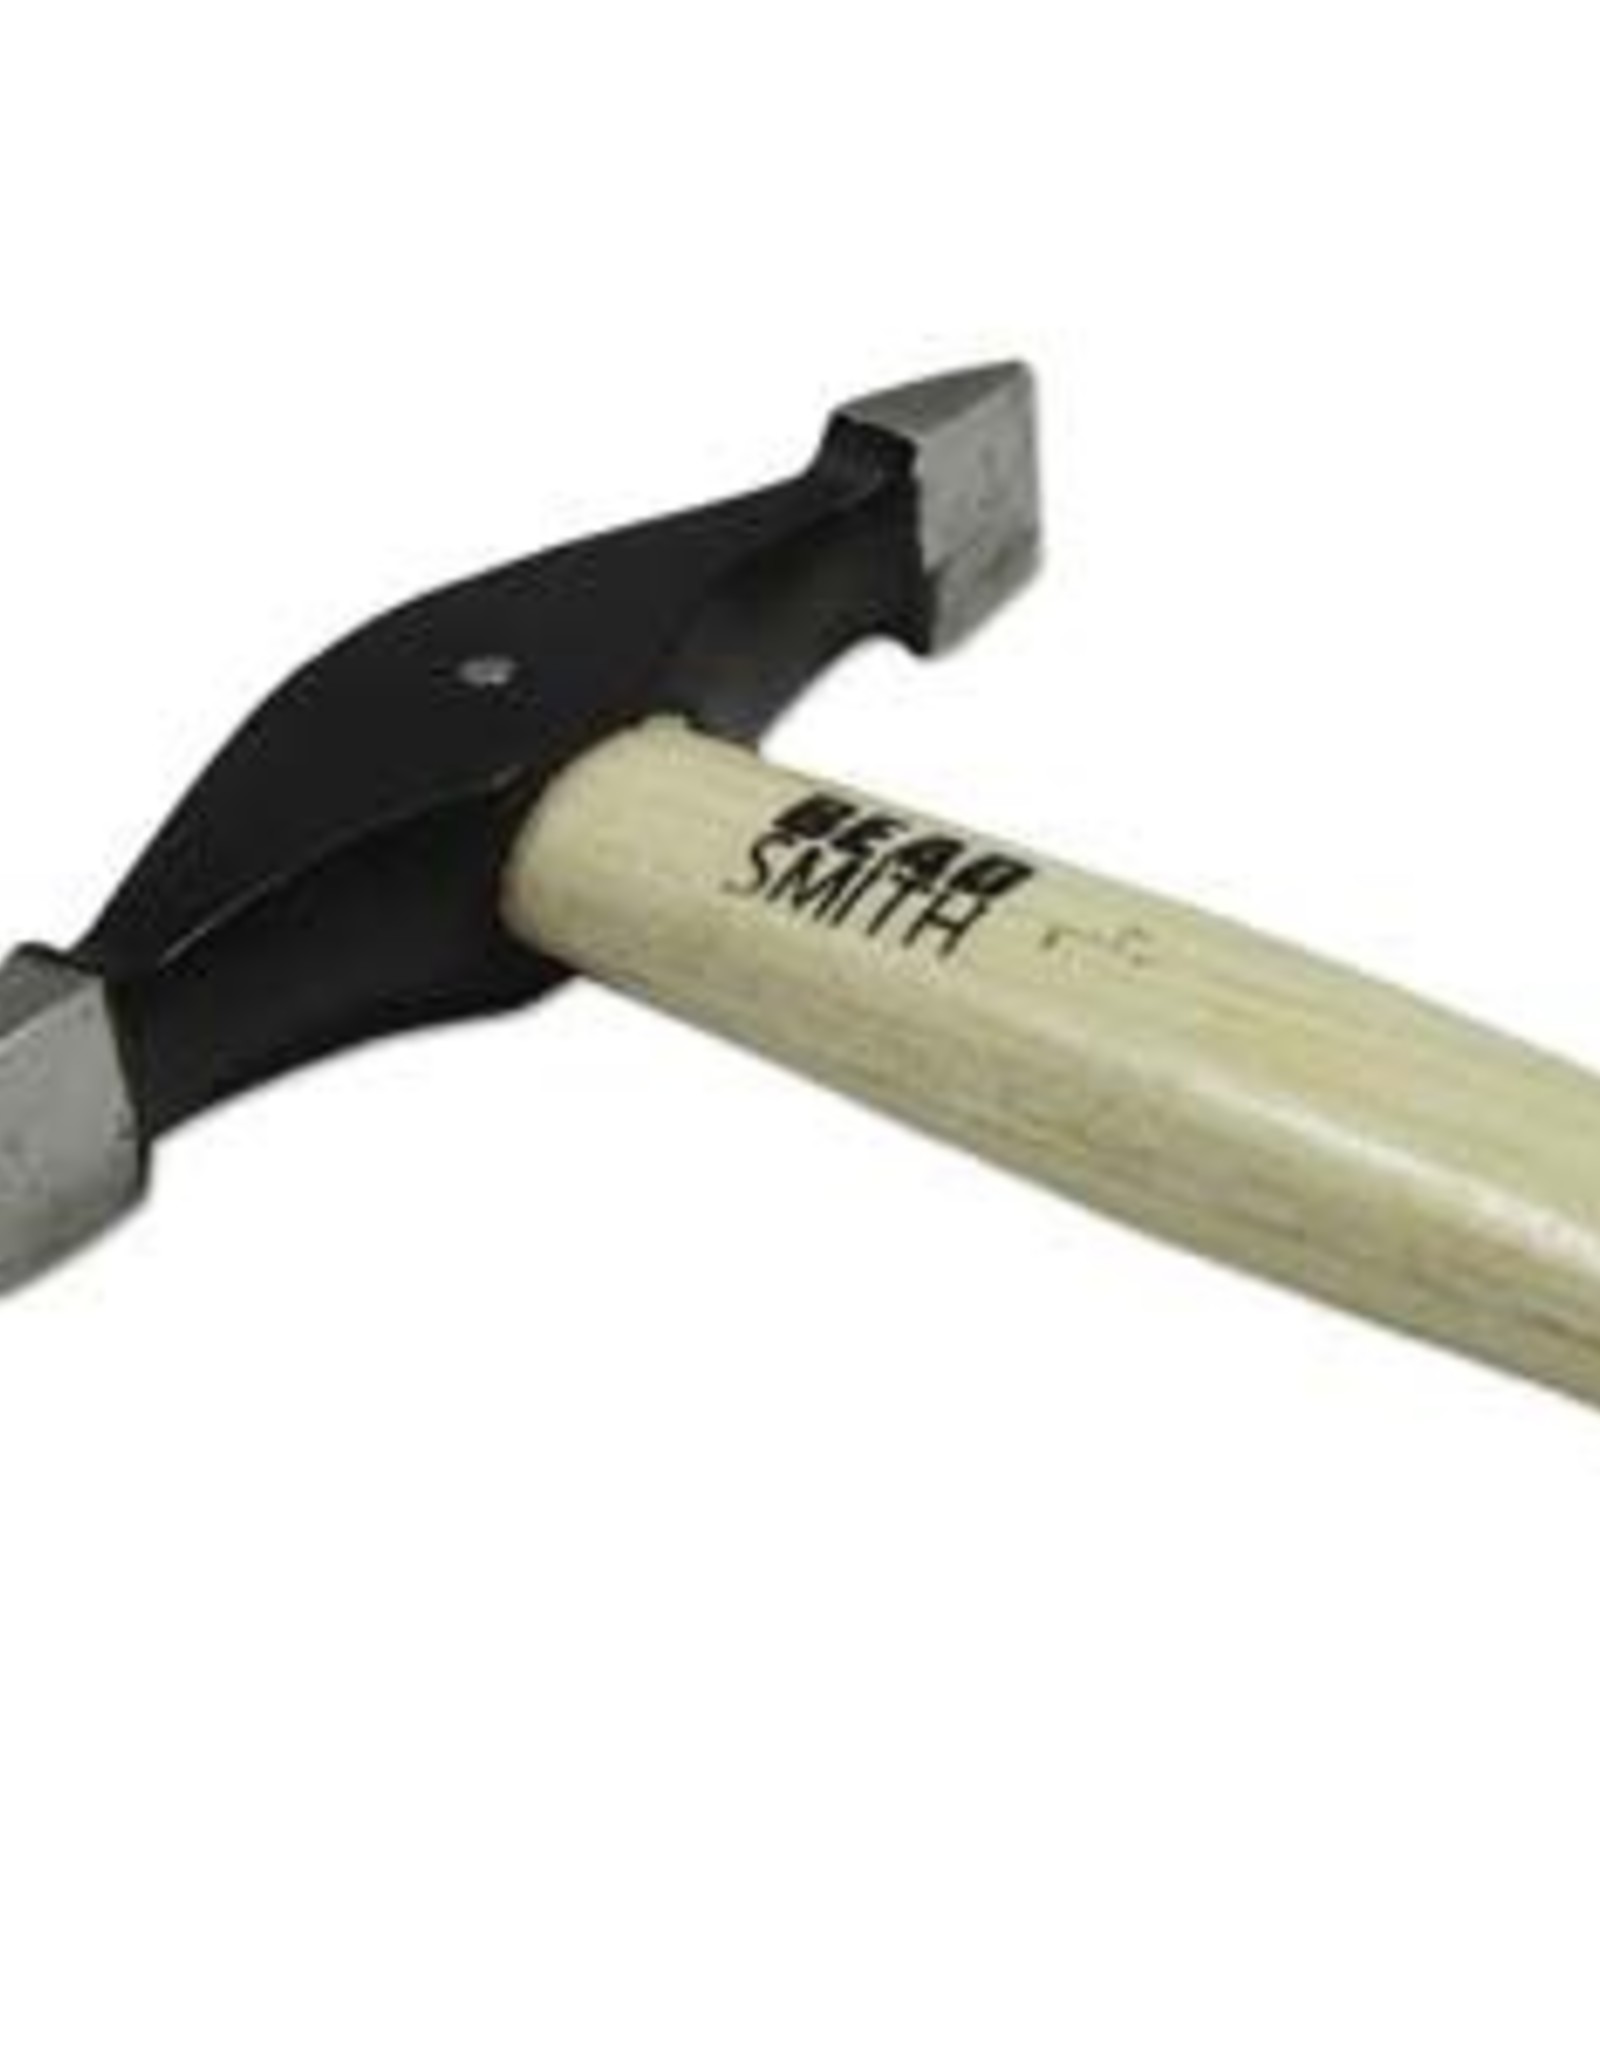 Beadsmith SHARP TEXTURING HAMMER TWO 12MM STRAIGHT FACES